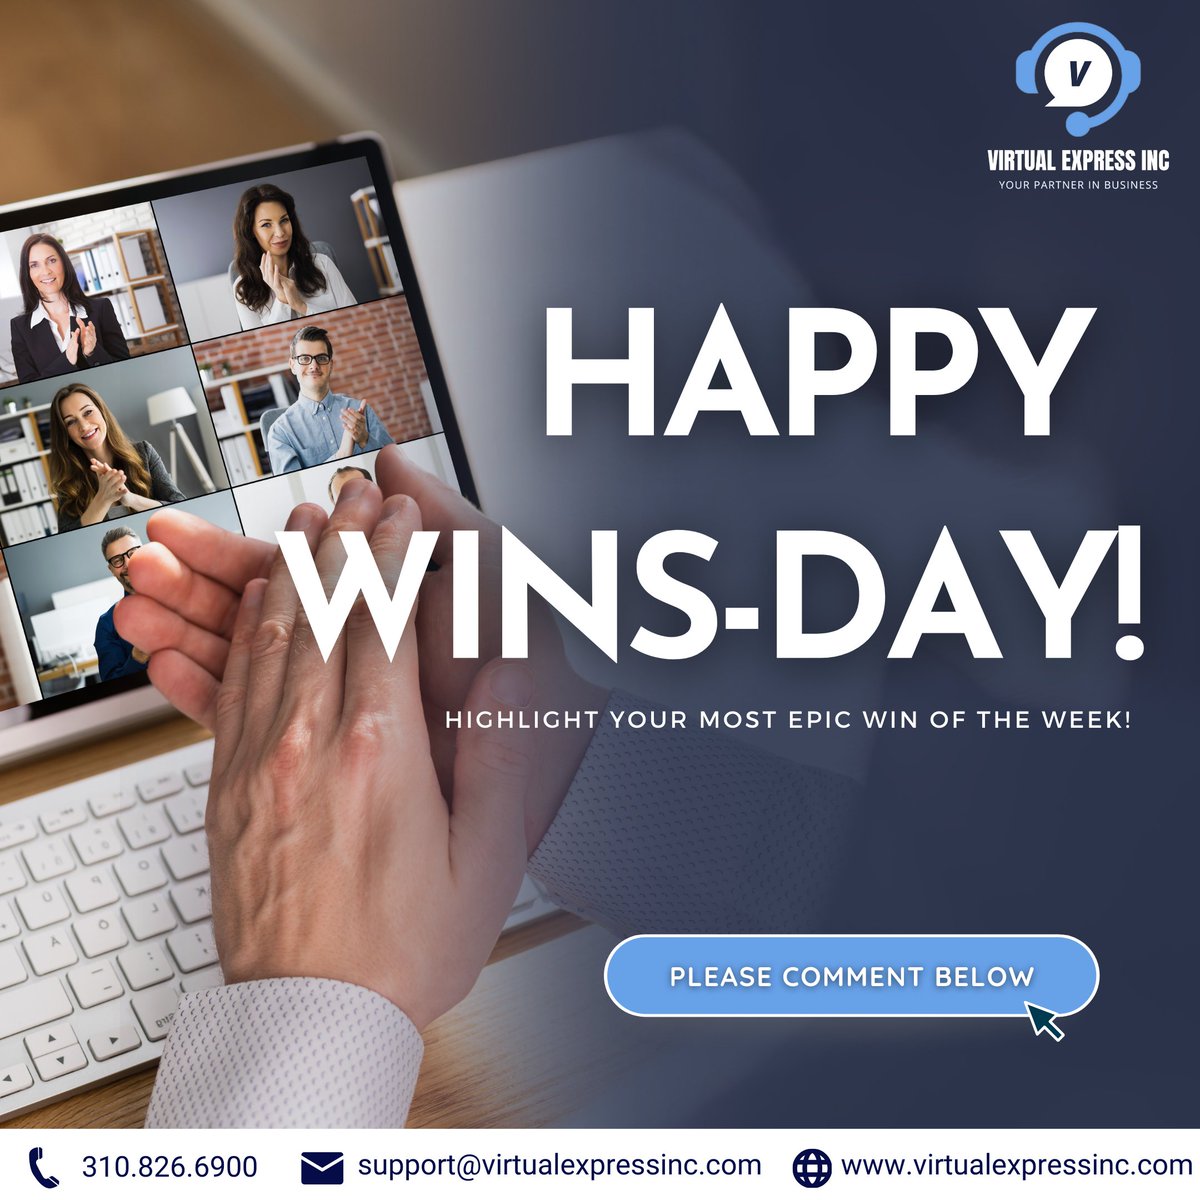 🚀 VA Magic = Business Win! 💼✨

Don't forget to applaud your assistants for their victories!

🌟 Tag your VA collaborator in success and keep the winning streak alive! 🎉

Looking for a VA? Reach out to us!

#VAWin #BudgetFriendlyVA #ValueForMoney
#RockstarVA
#VirtualExpressInc